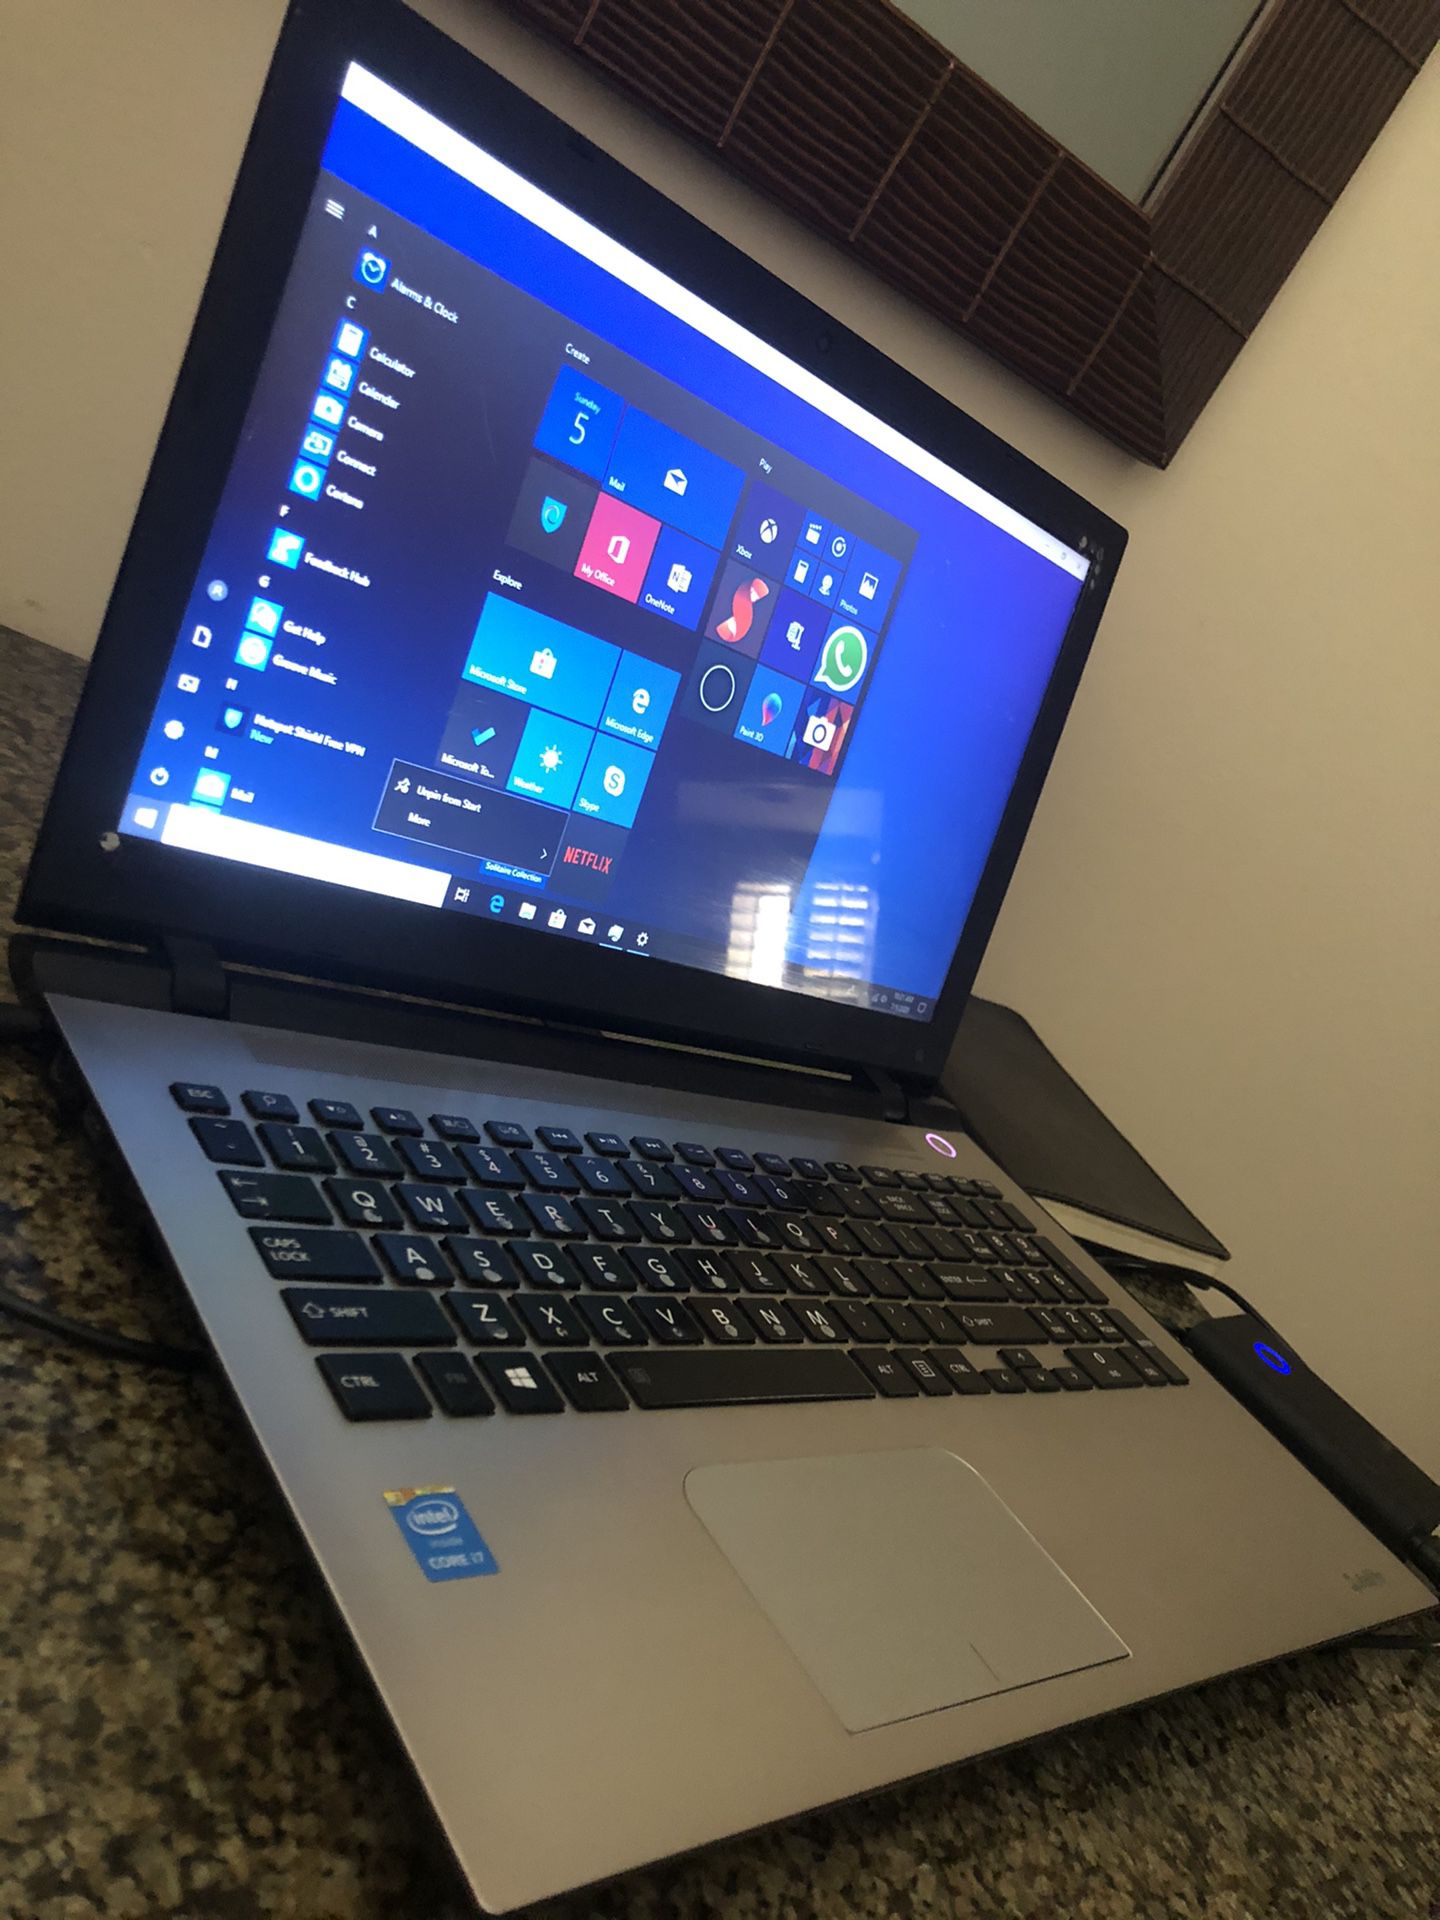 Toshiba S55-00E00M 15.6” LED Intel Core I7 2.4ghz CPU 12GB HDD 256GB Solid State Drive Win 10 Brushed Aluminum Body